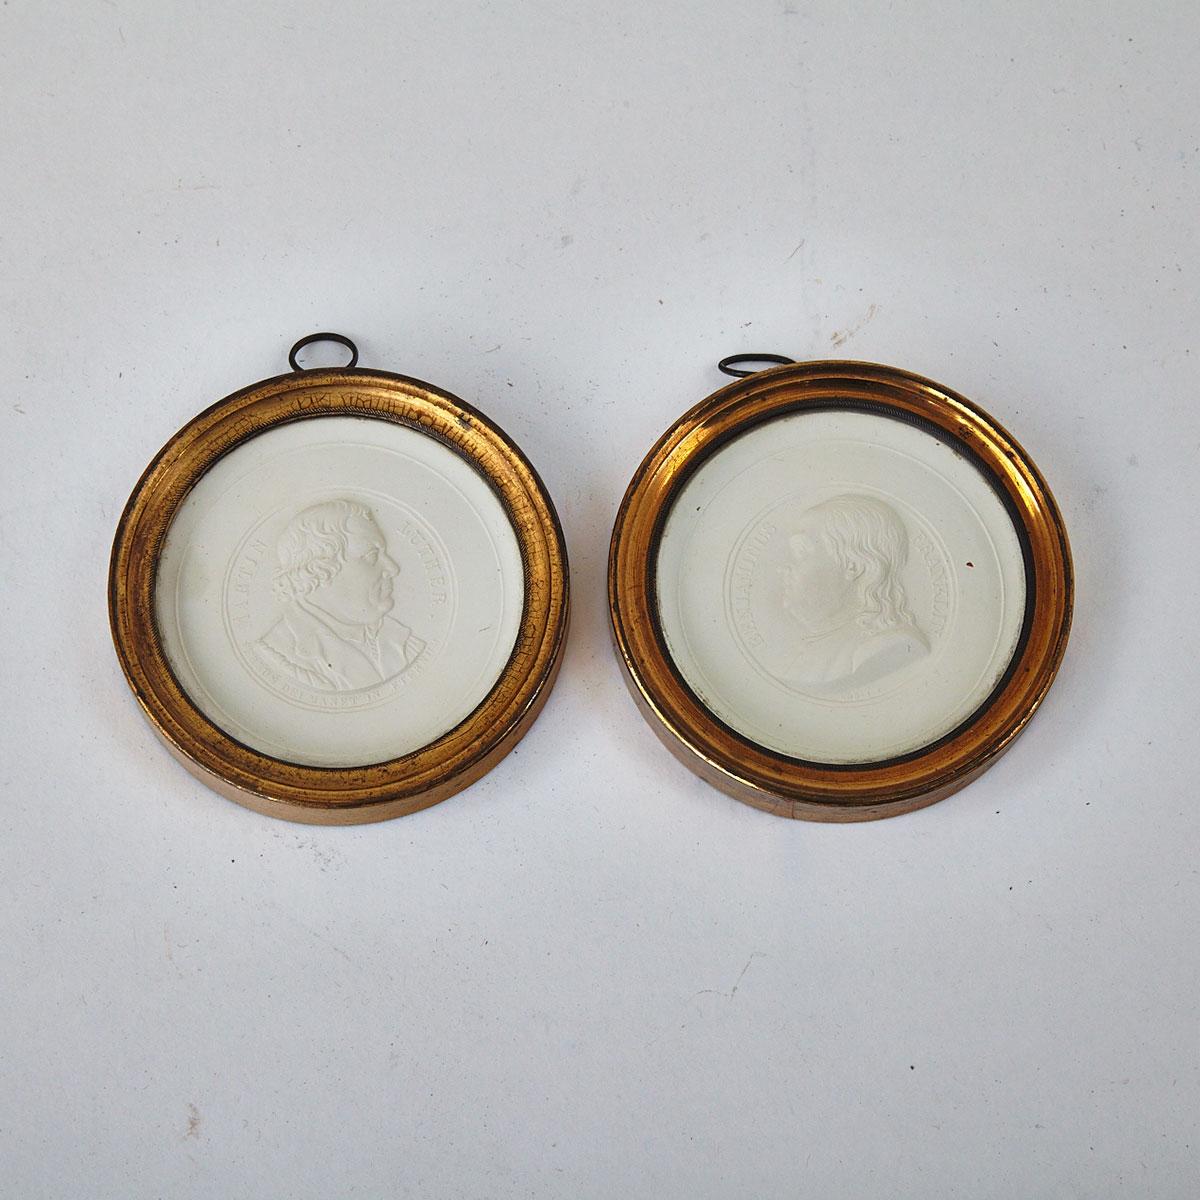 Two Plaster Relief Portrait Roundels, early 19th century